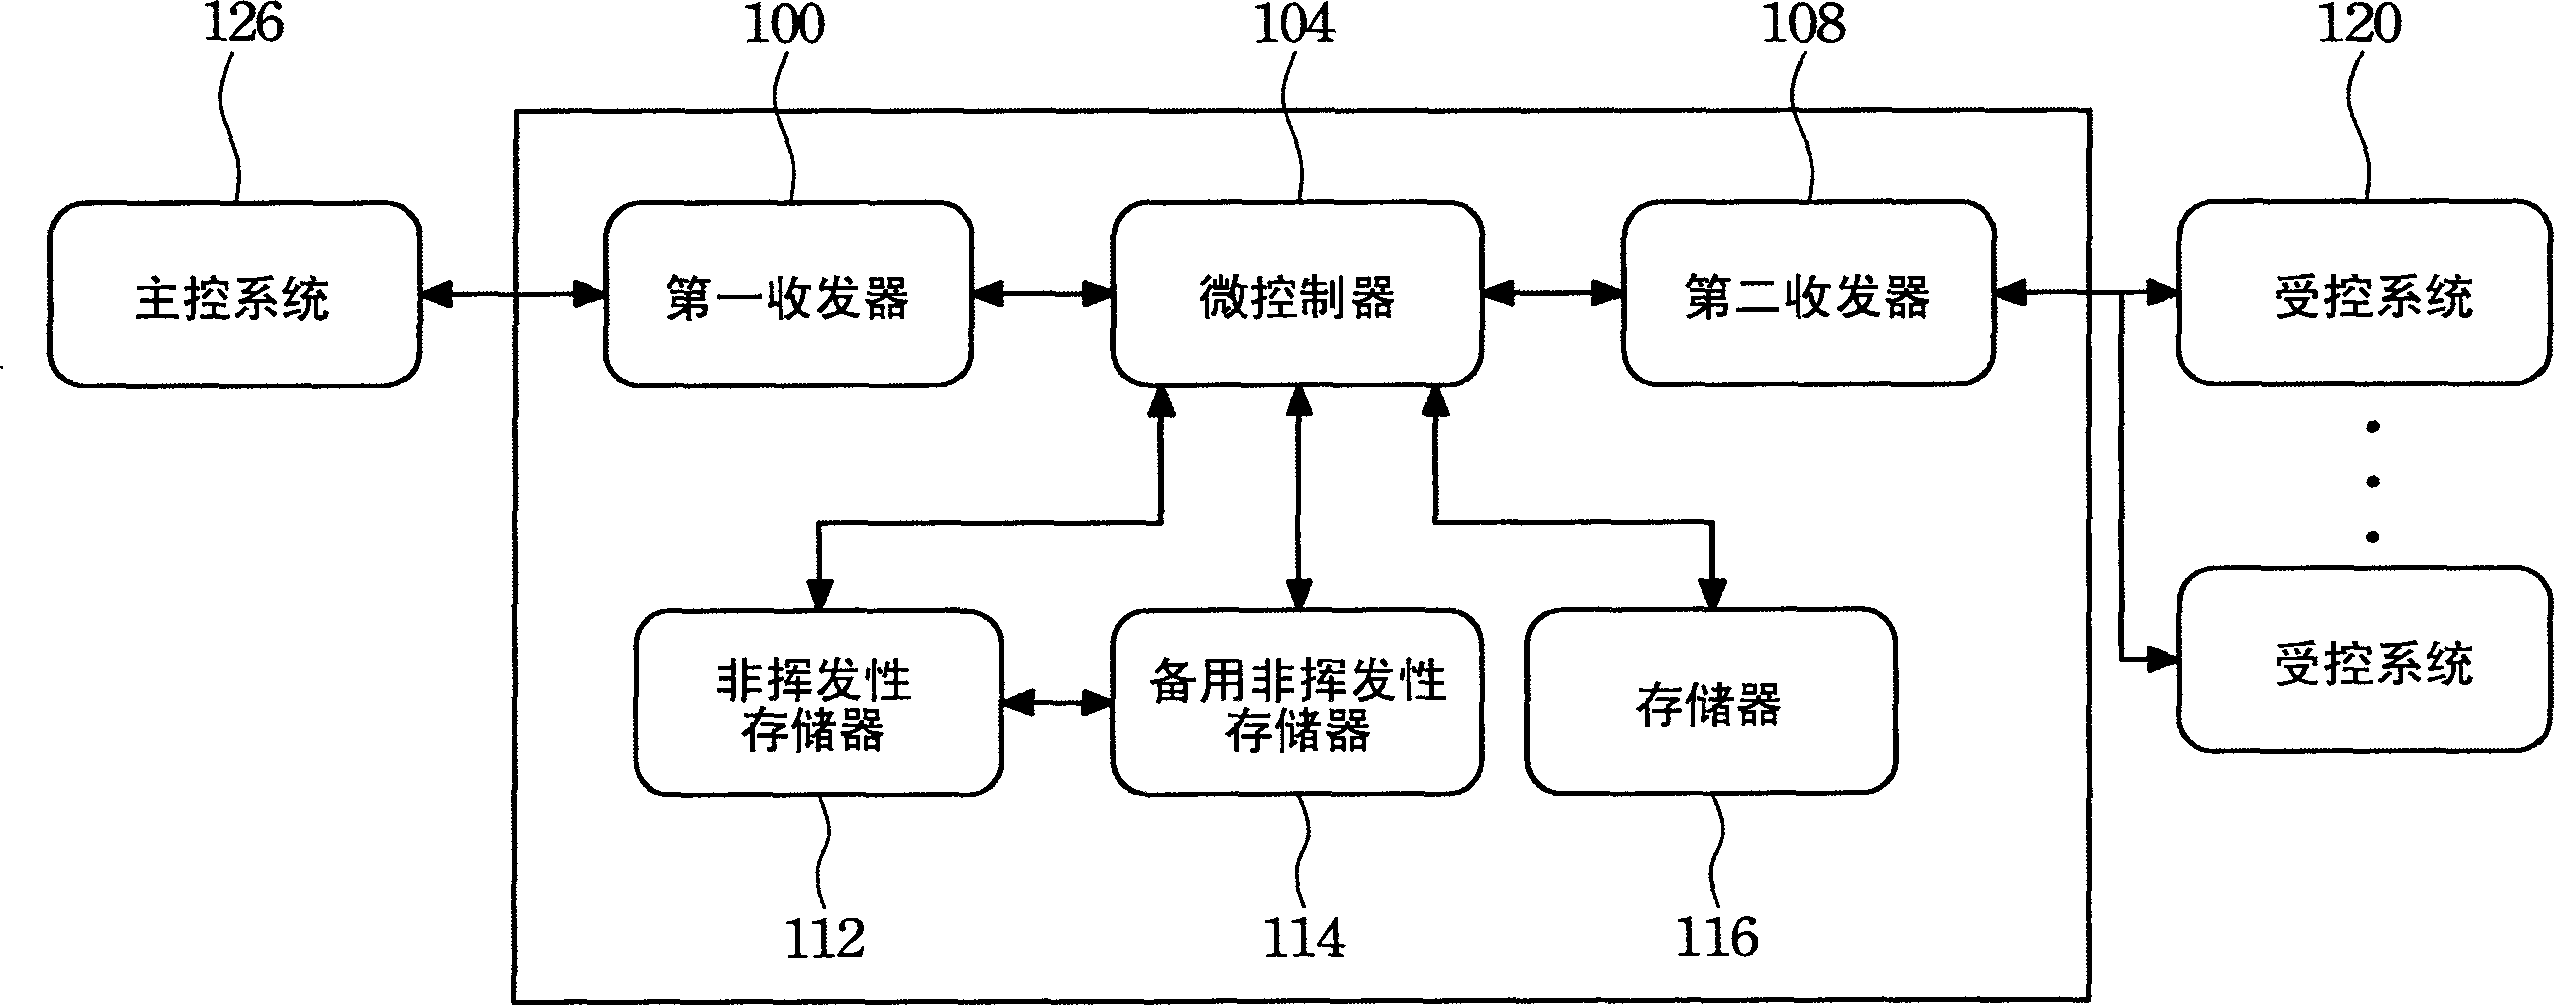 Back-up method for operational flowchart records in communication accessing iterface device